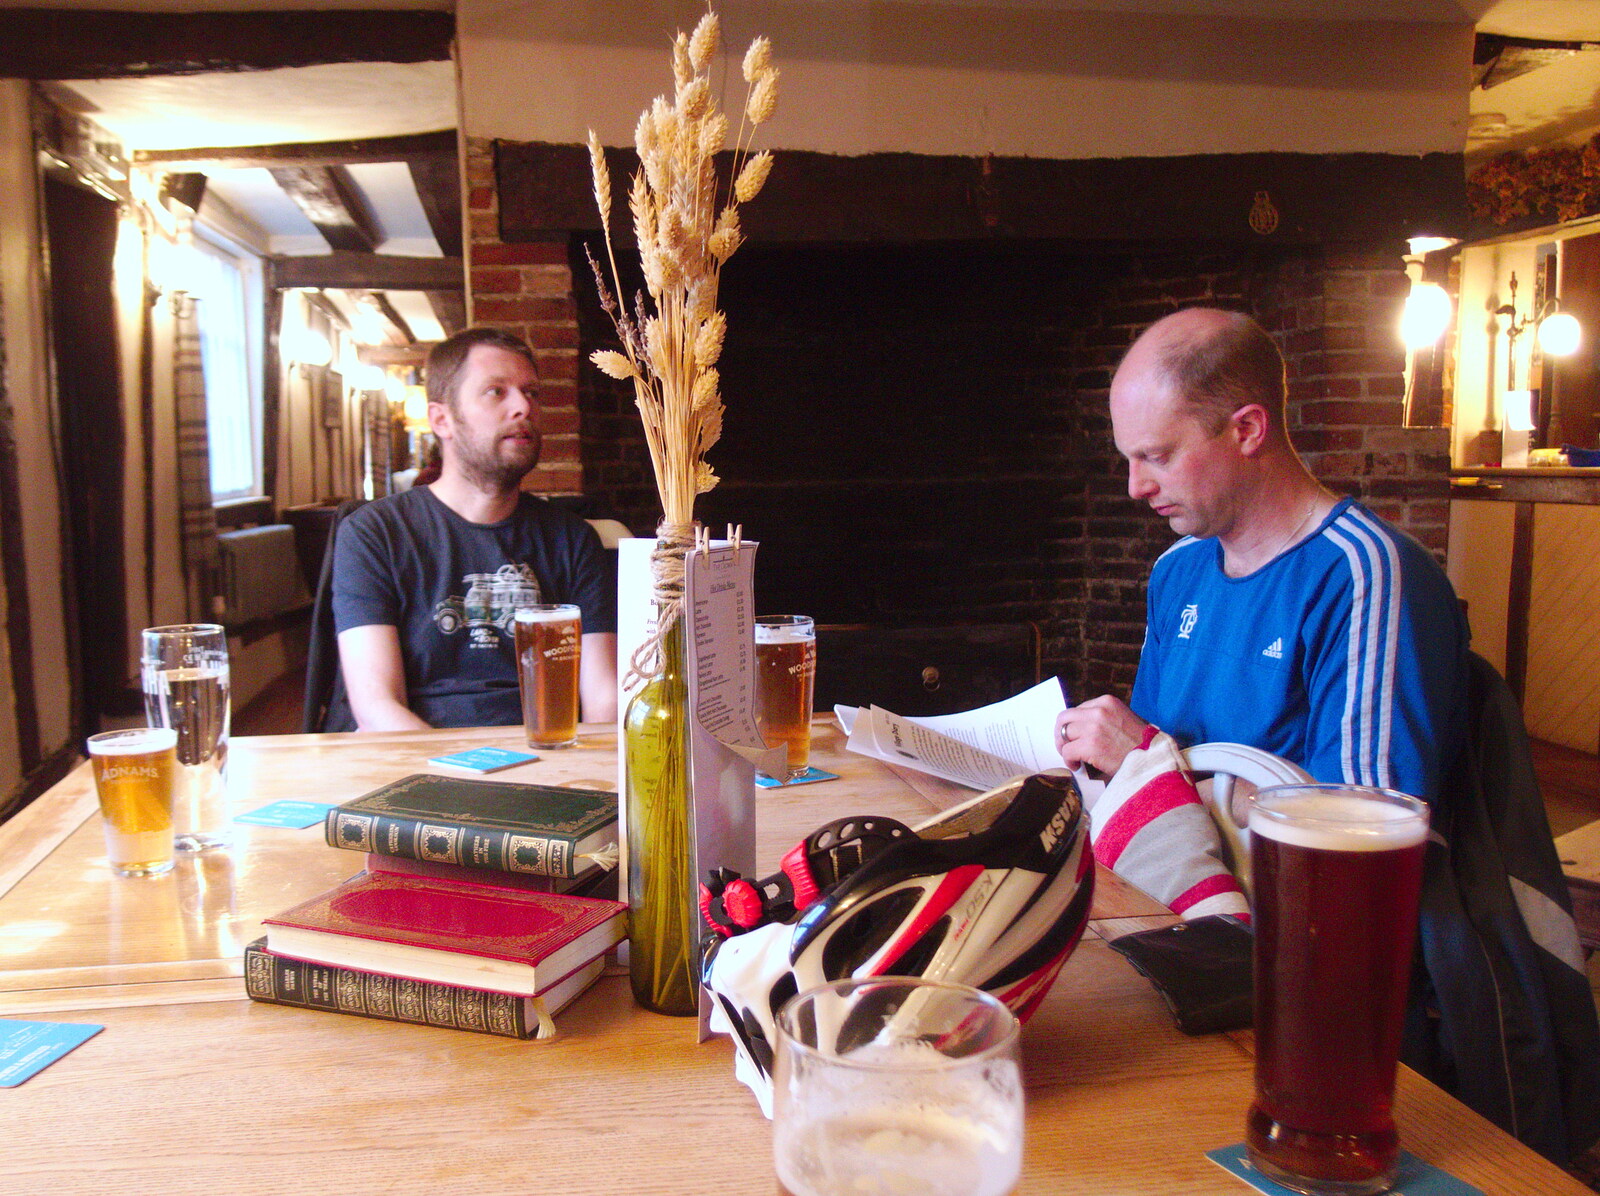 The BSCC at Pulham Market and Hopton, and Lunch in Paddington - 21st May 2019: The Boy Phil looks around as Paul reads something